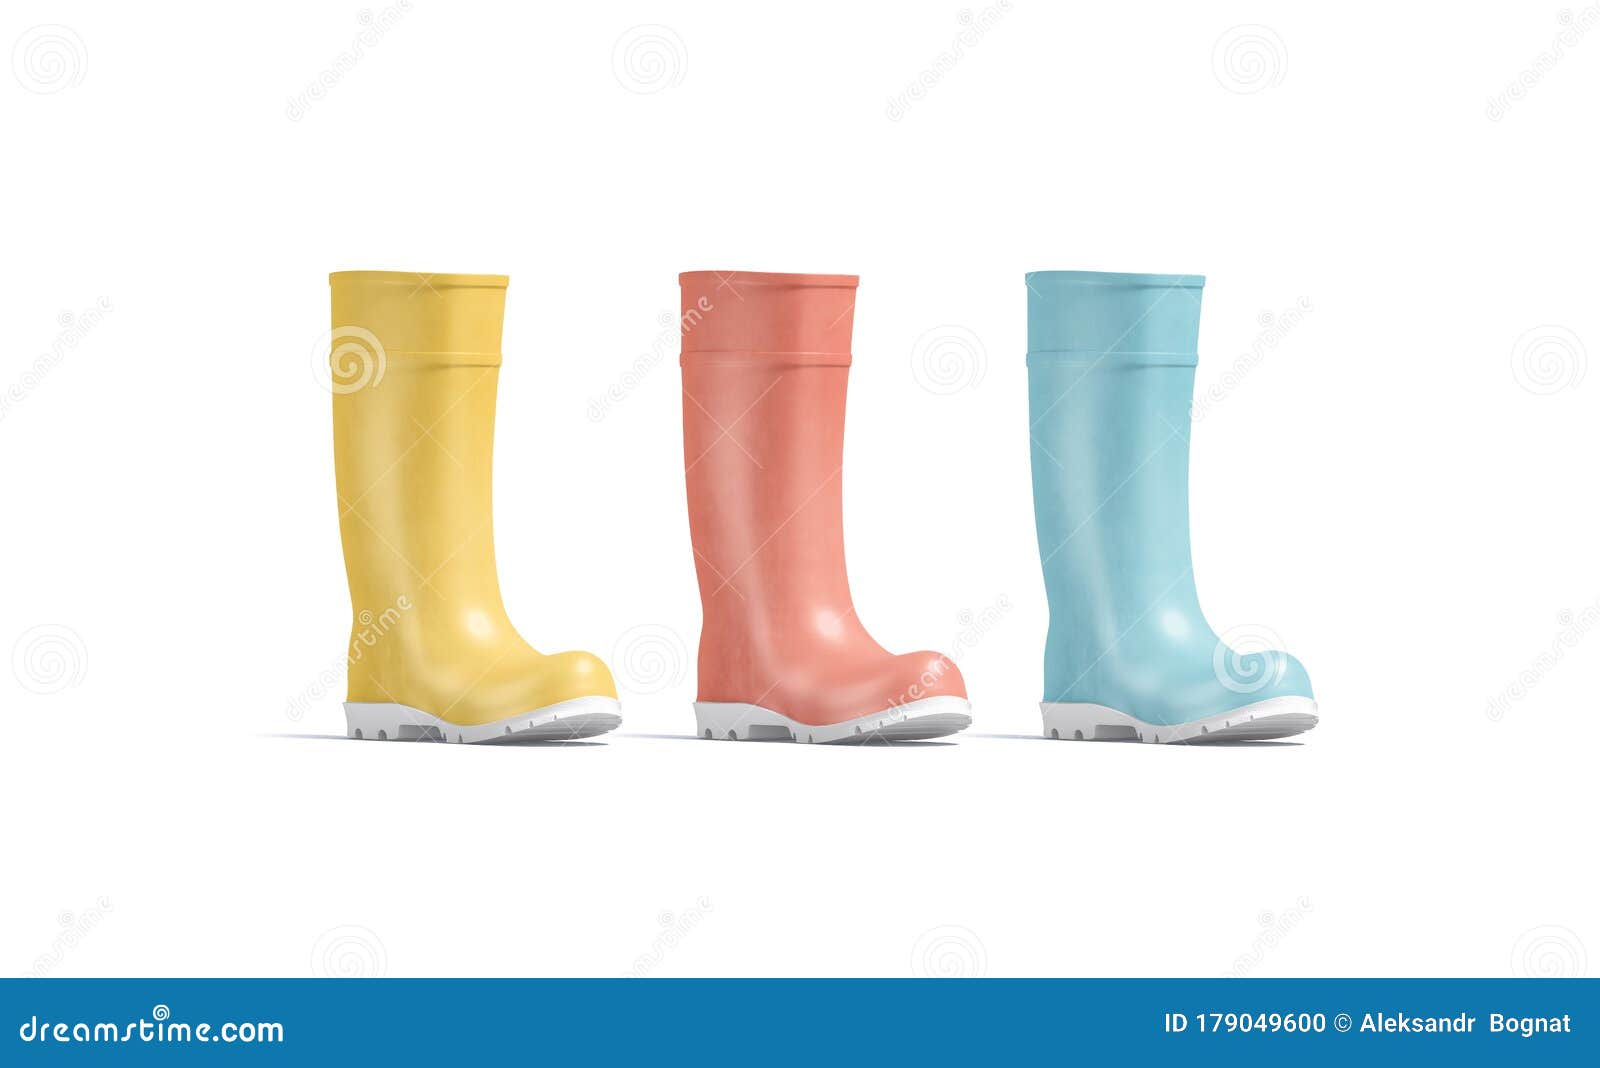 Download Blank Colored Rubber Wellington Boots Mockup, Half-turned ...